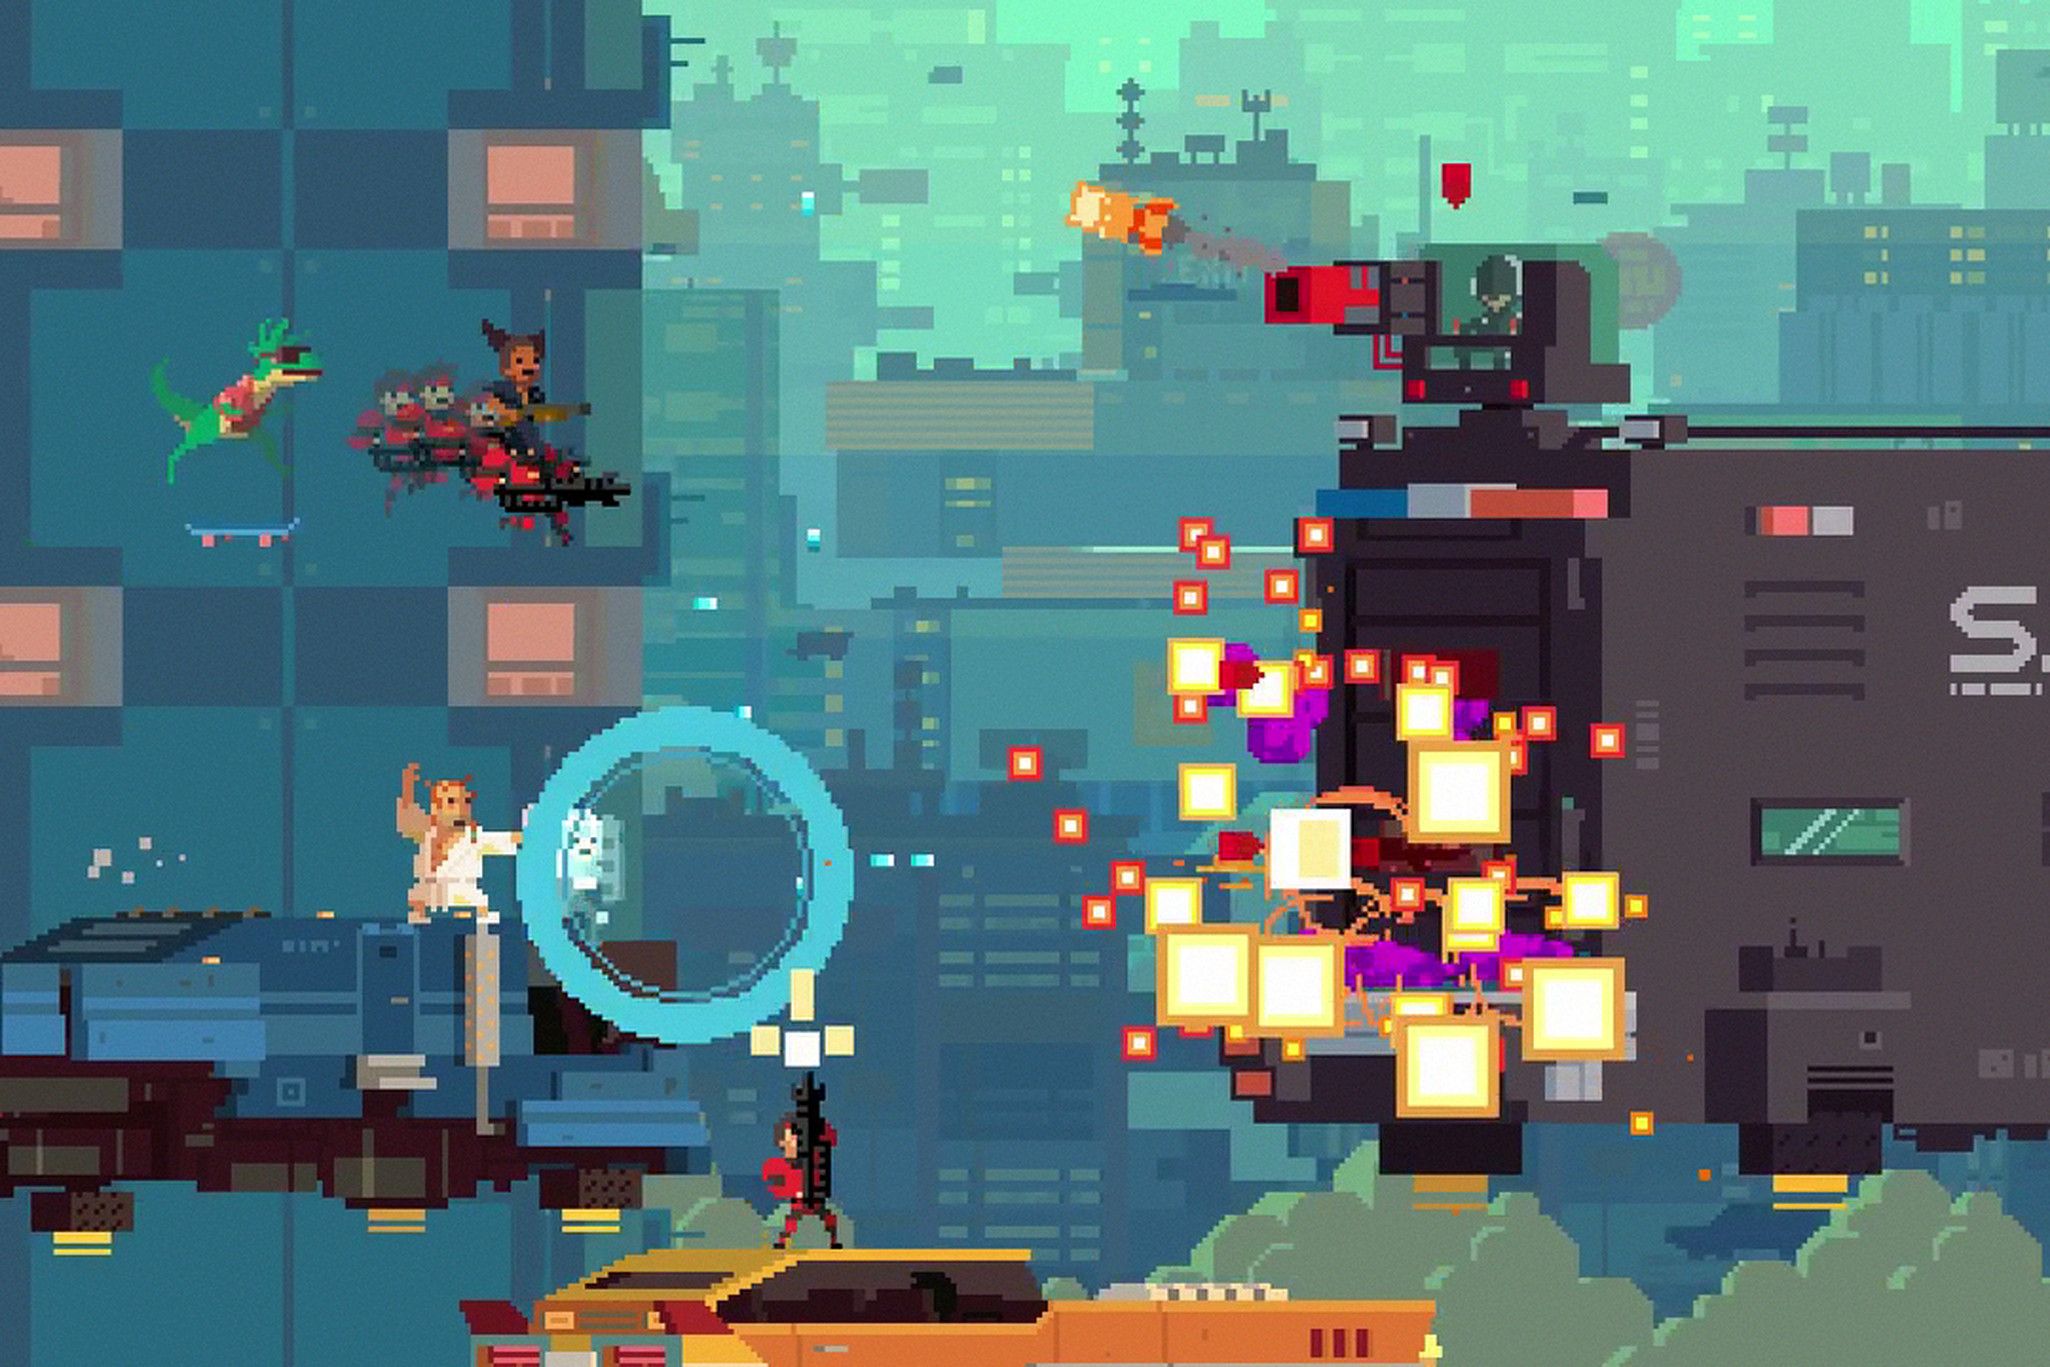 Pixel art games aren't retro, they're the future